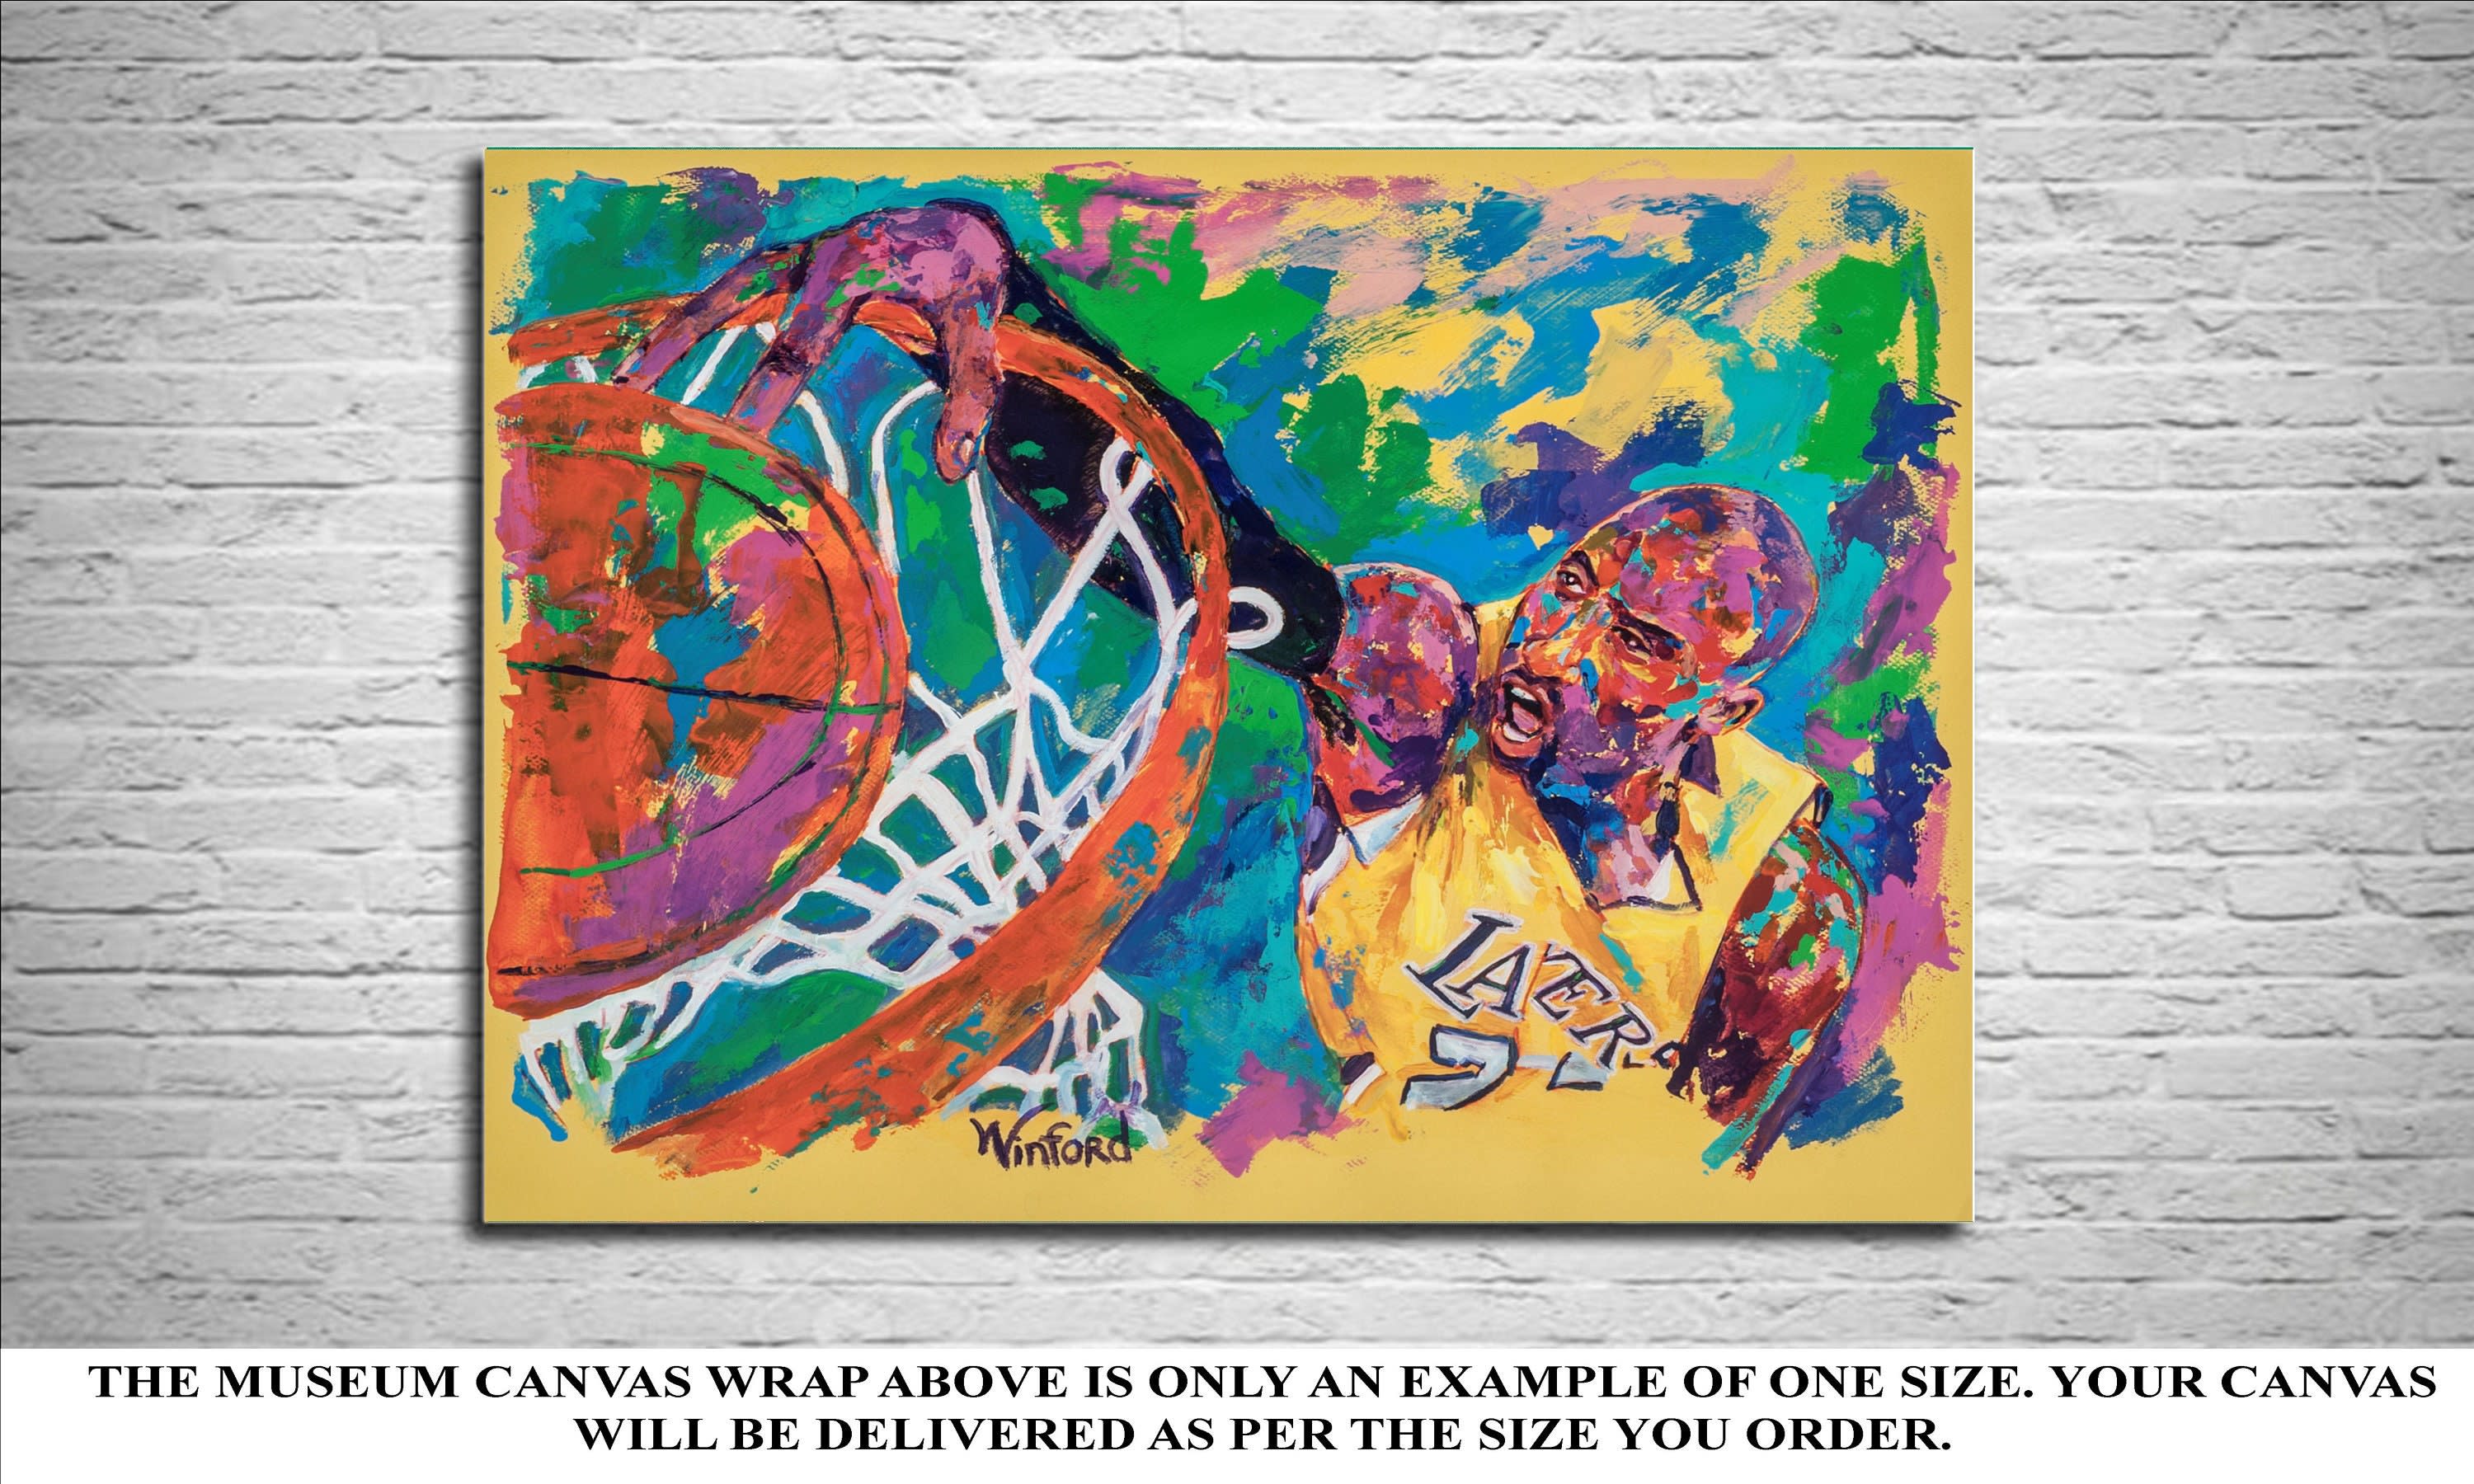 Kobe Bryant Poster, Kobe Bryant Gift, Kobe Bryant Colorful Layered